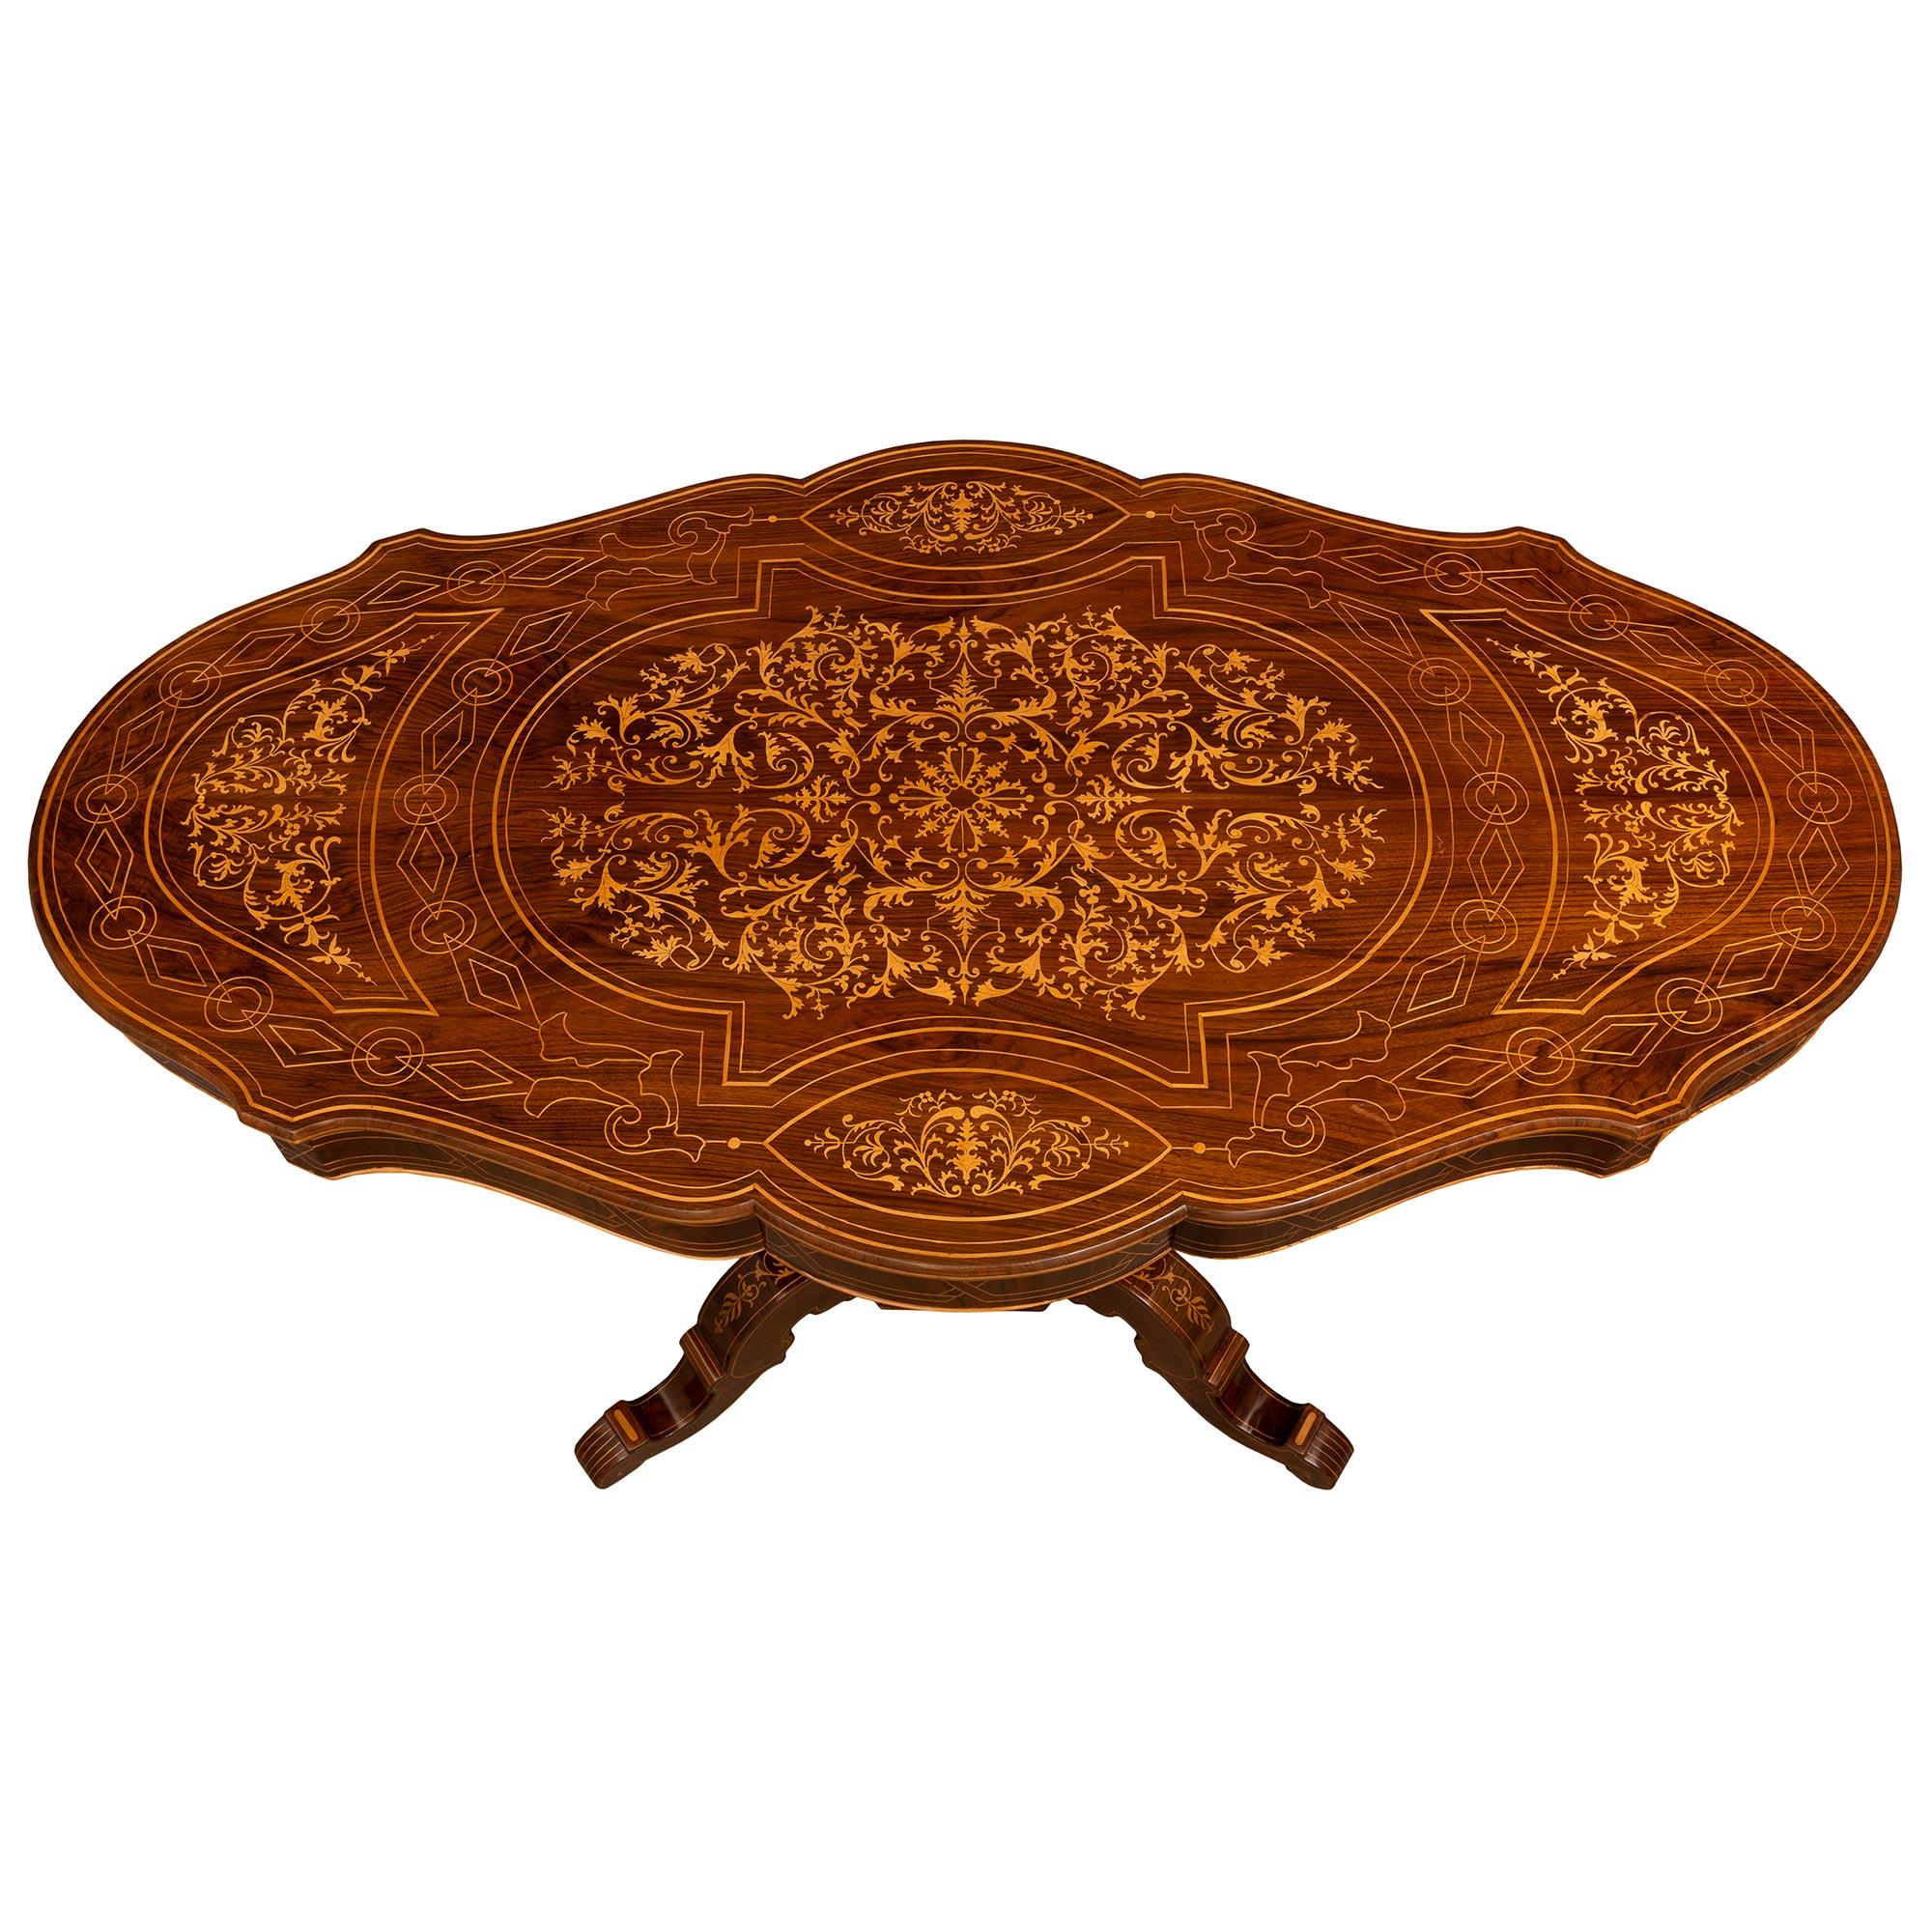 A beautiful and most decorative Italian 19th century Charles X period Walnut and Maplewood side/center table. The table is raised by four elegantly scrolled legs connected to a most decorative octagonal support decorated with charming intricately